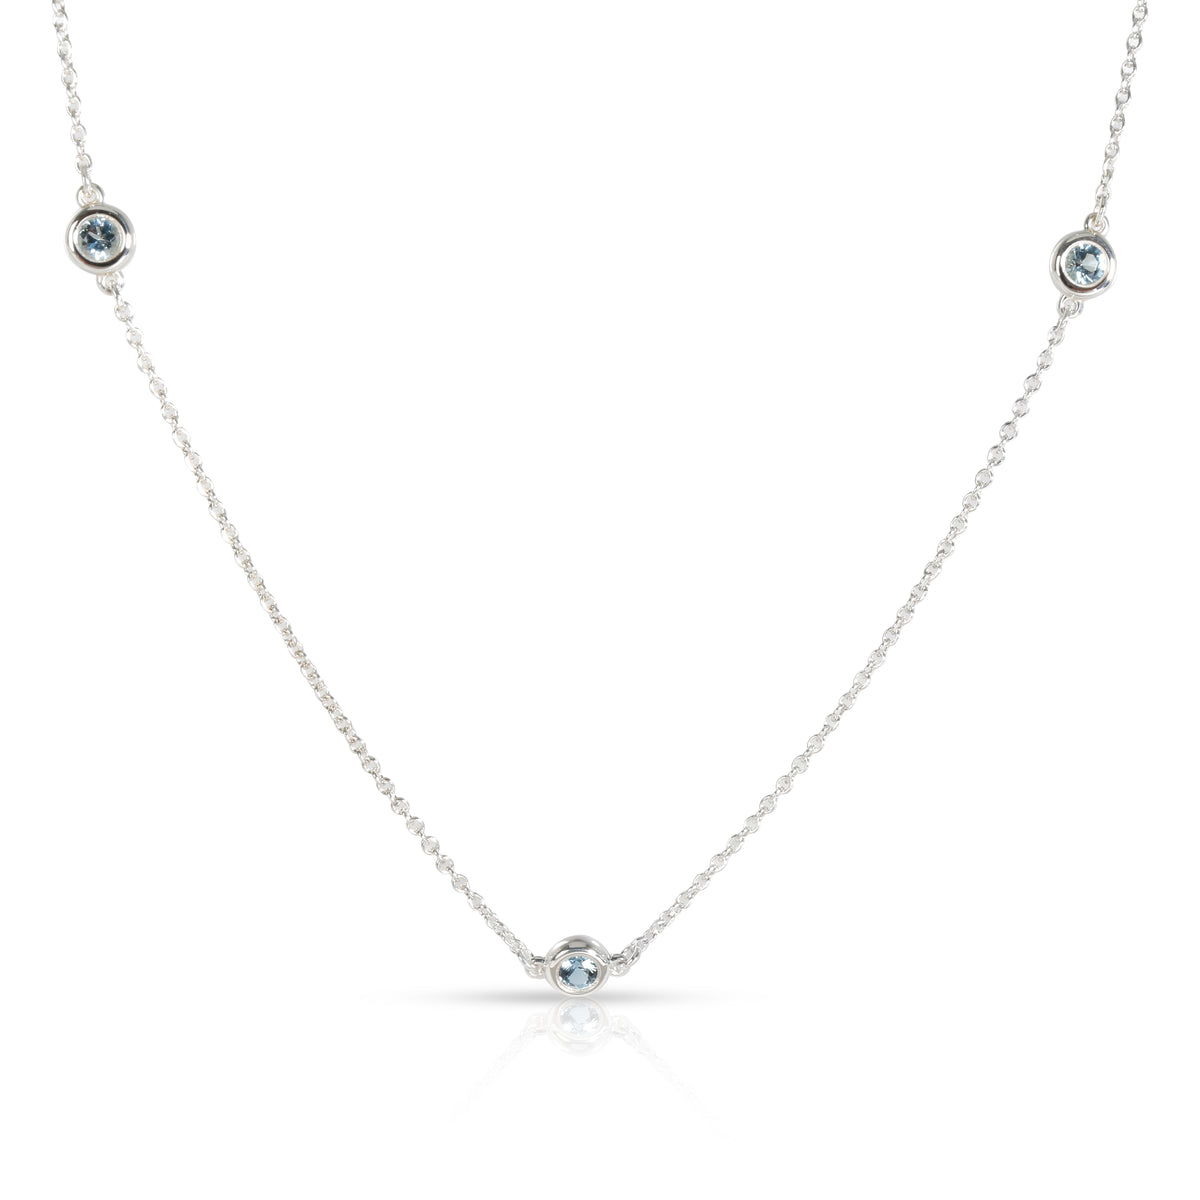 Tiffany Elsa Peretti Color by the Yard Aquamarine Necklace in Sterling Silver